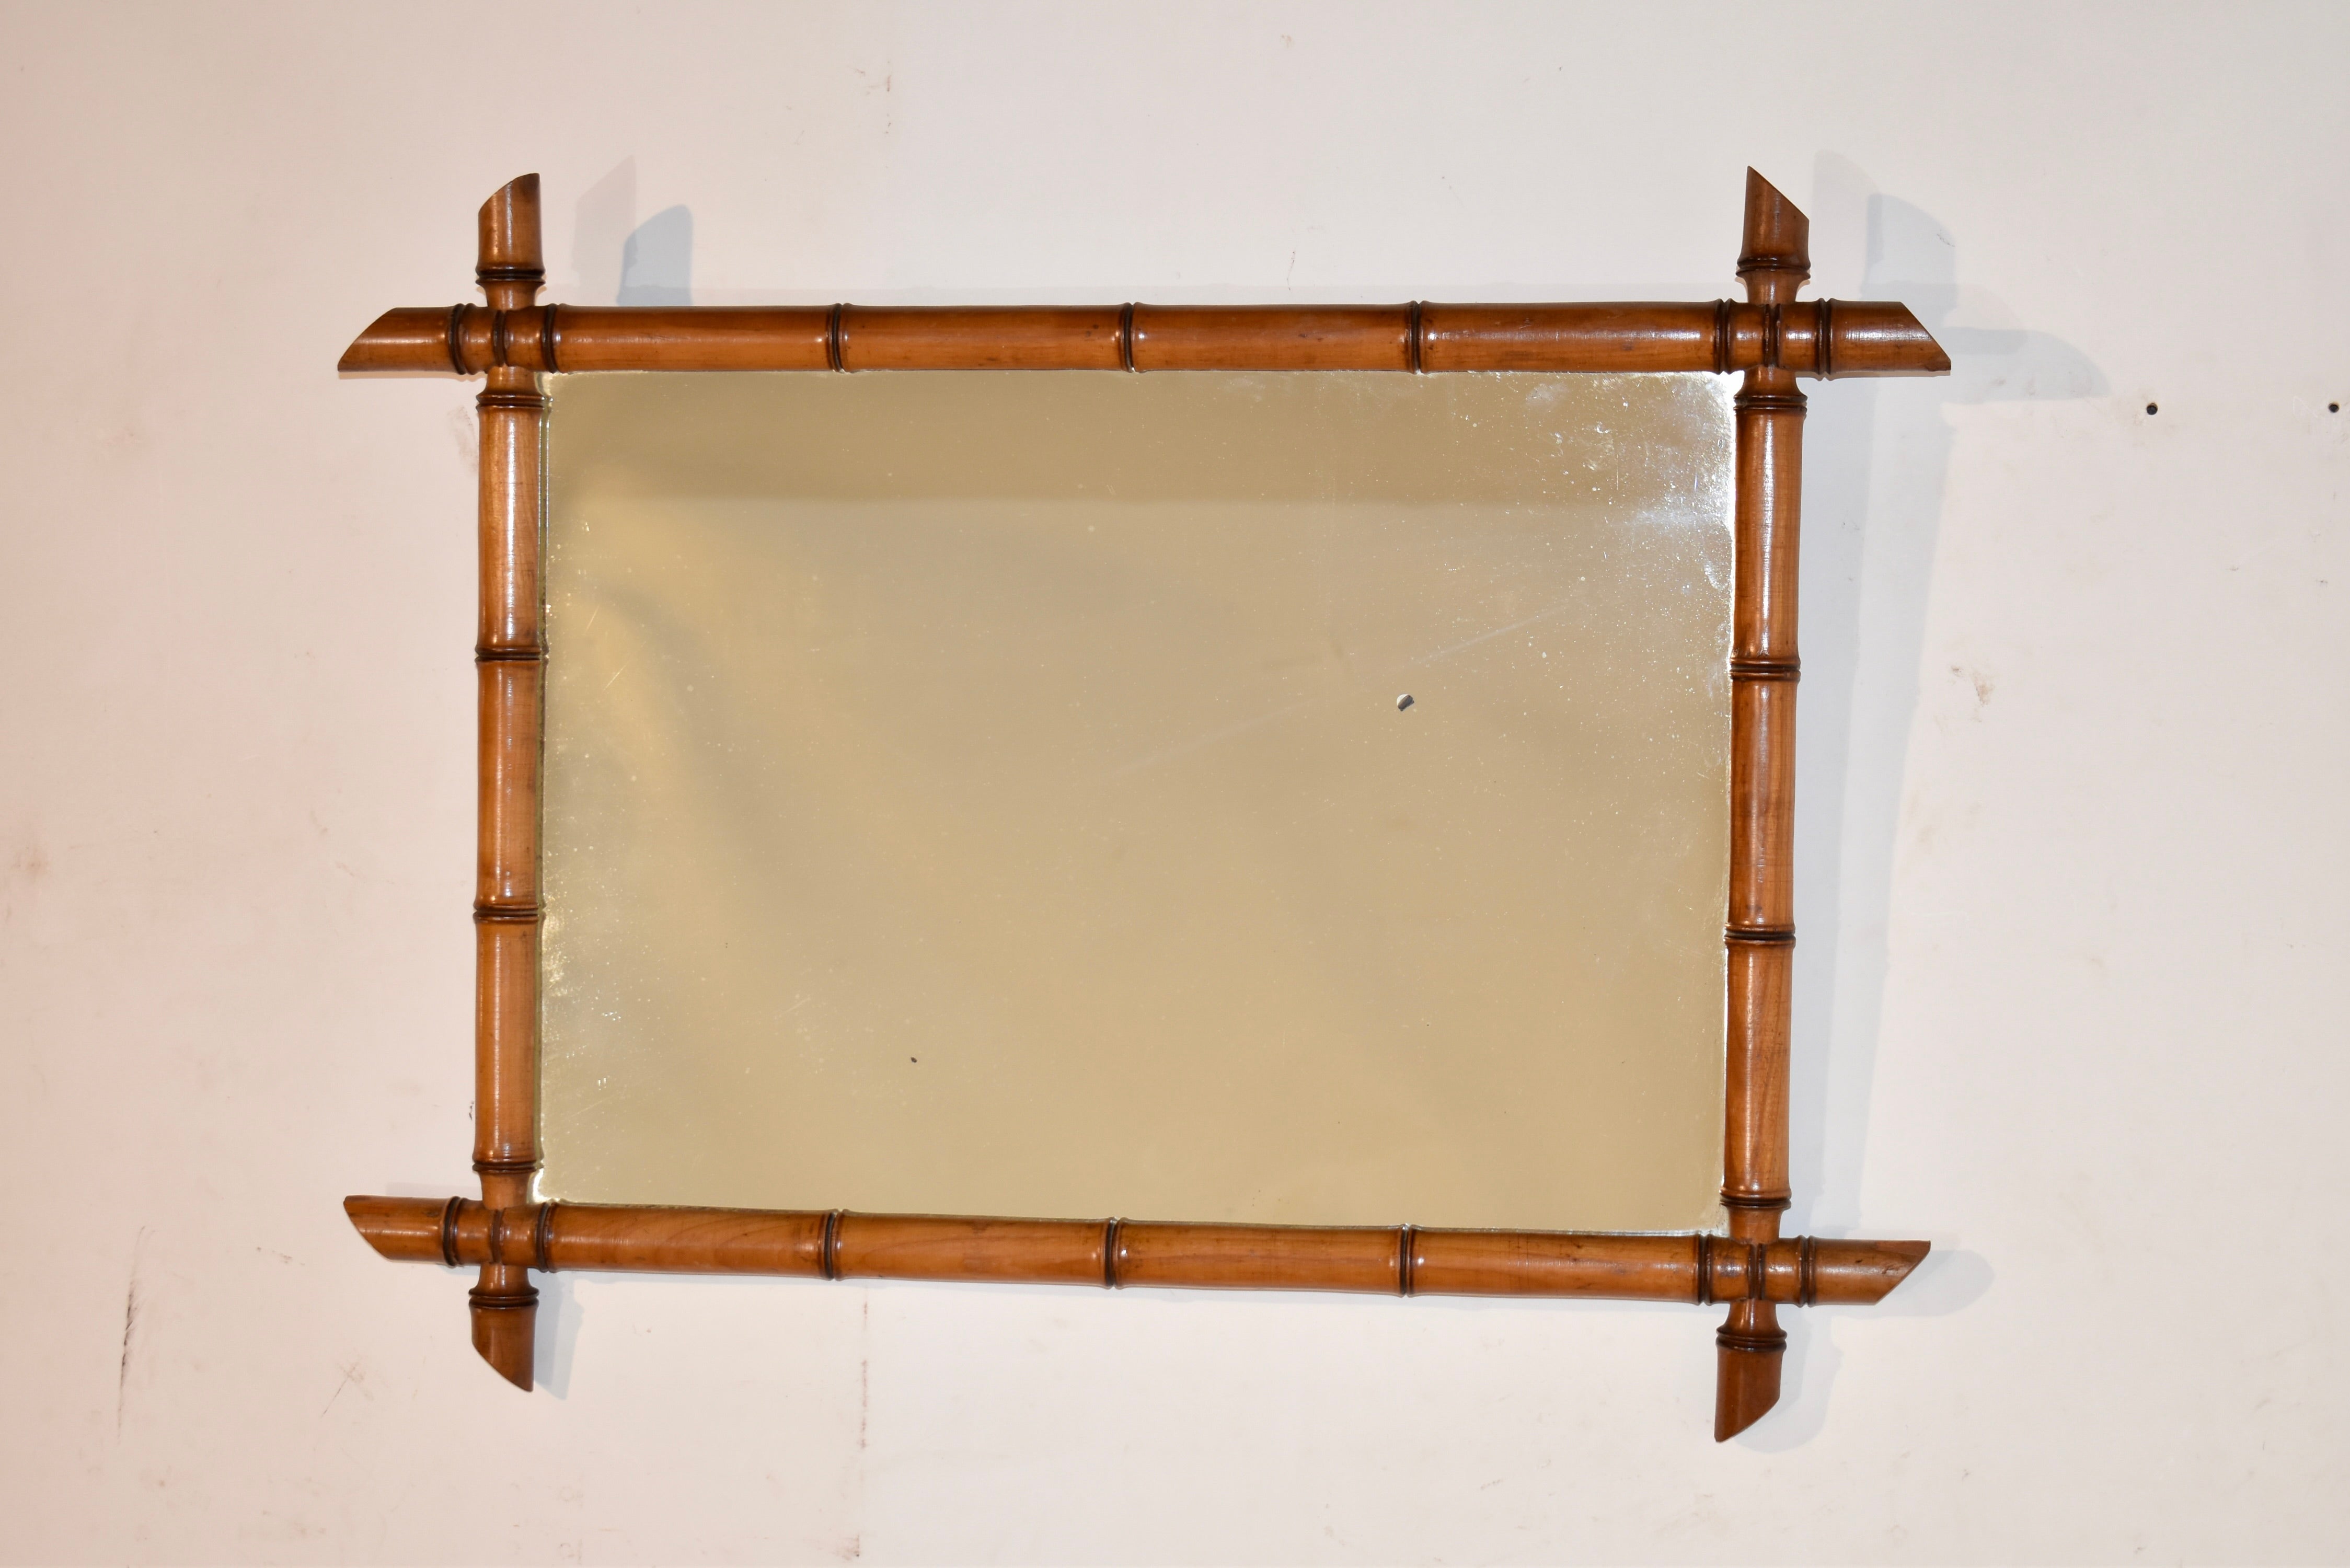 Late 19th century faux bamboo framed mirror from France.  The frame is made from cherry and is hand turned to resemble bamboo.  It surrounds an old mirror, which has some losses to the mercury from age, for a timeless look of elegance and